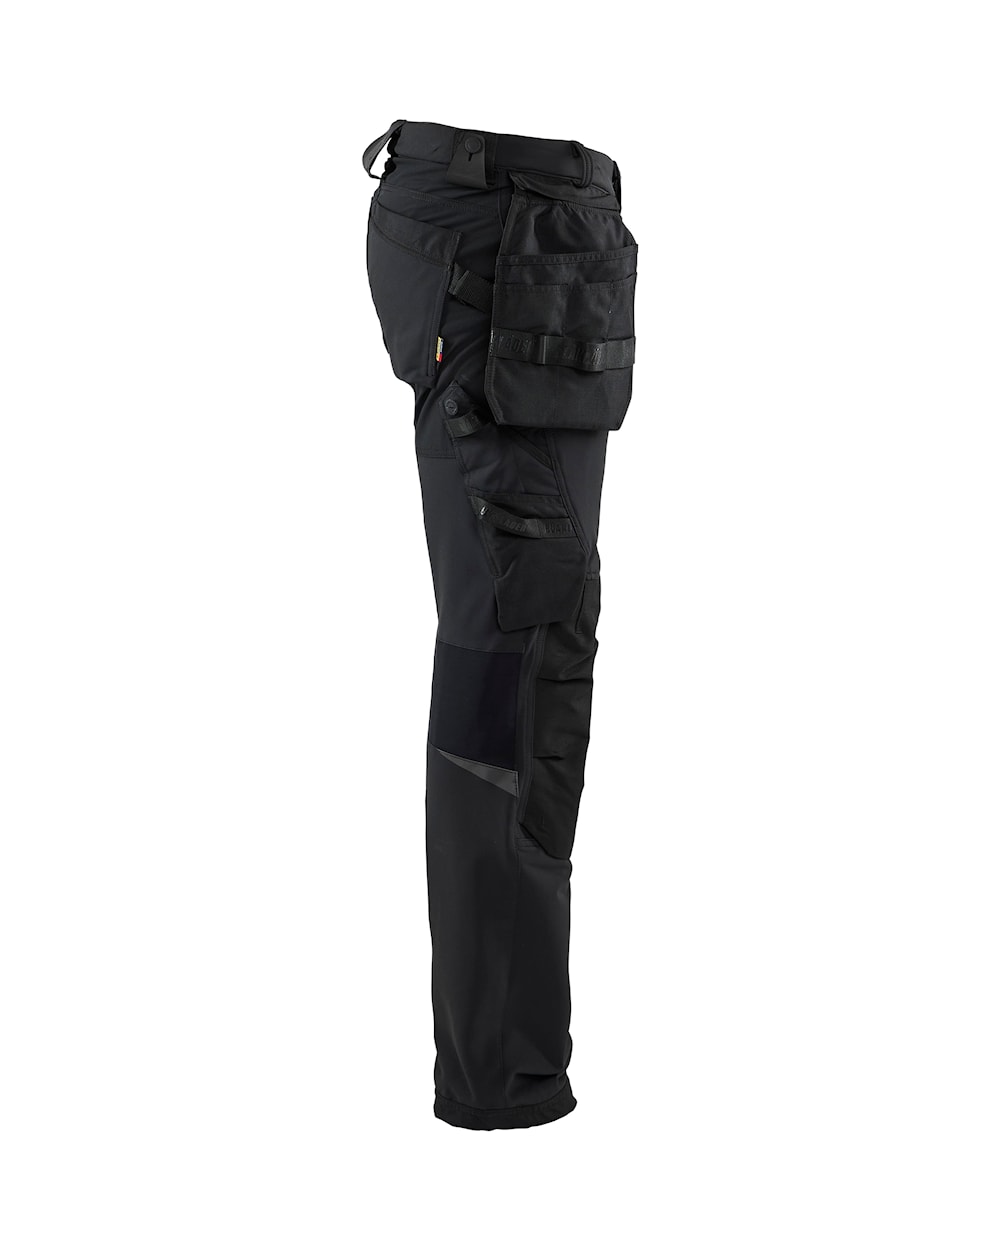 Blaklader 4-WAY STRETCH Work Pants - Lowest prices & free shipping